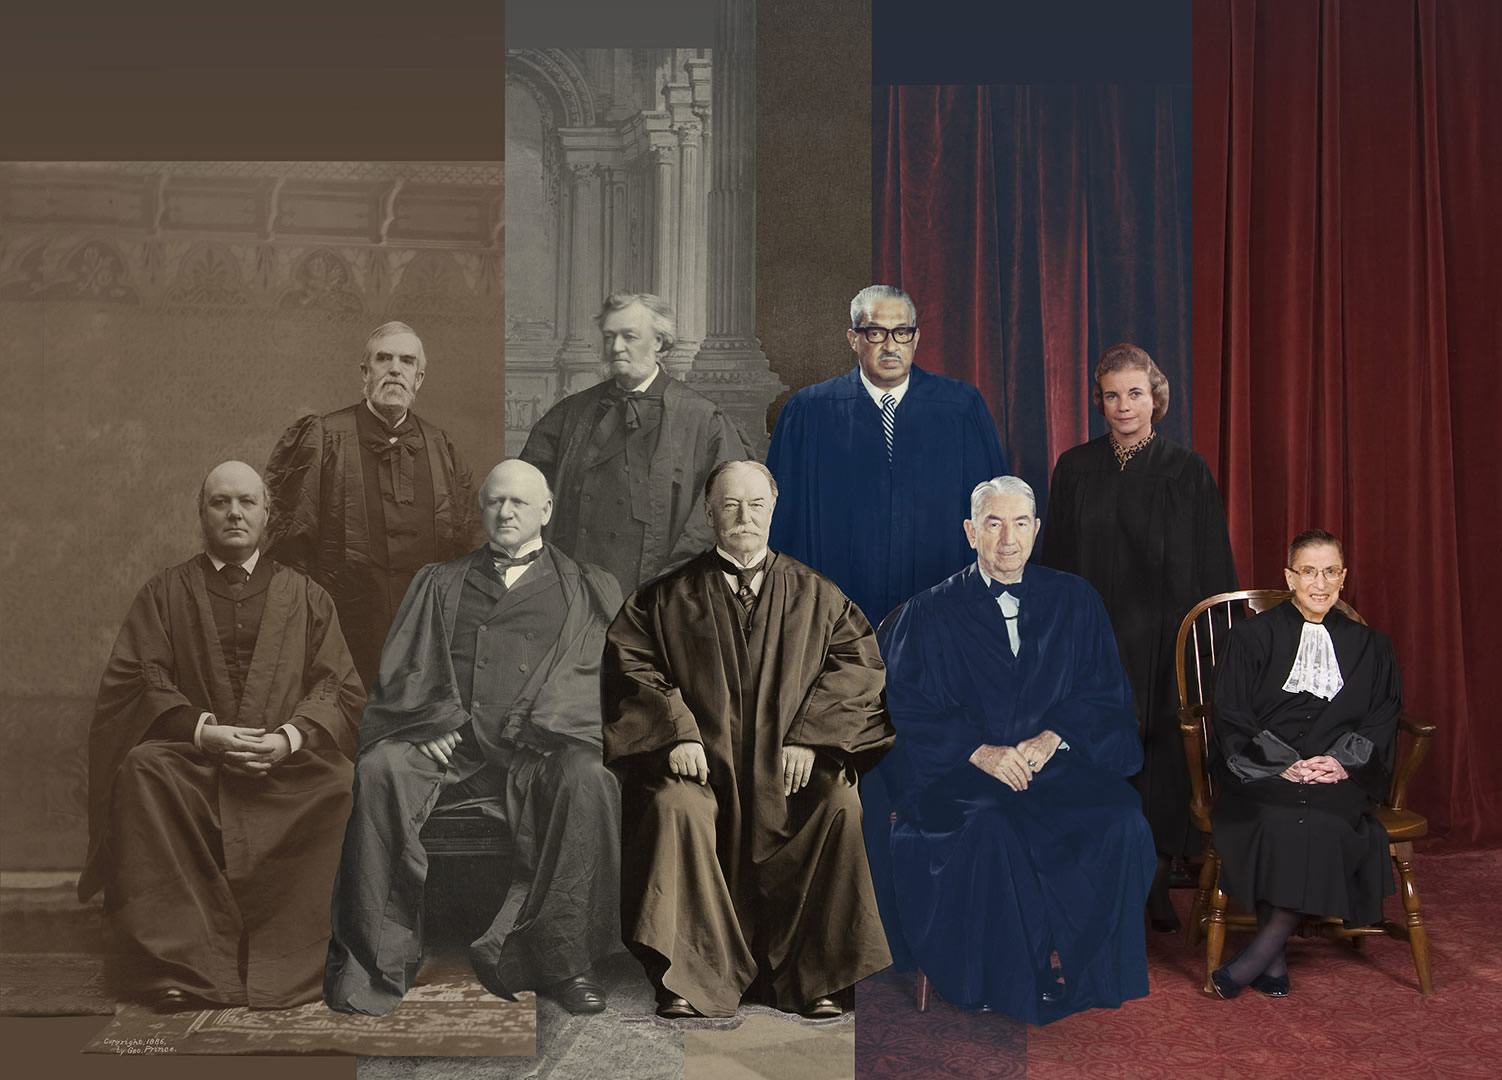 All Together for the Camera: A History of the Supreme Court s Group